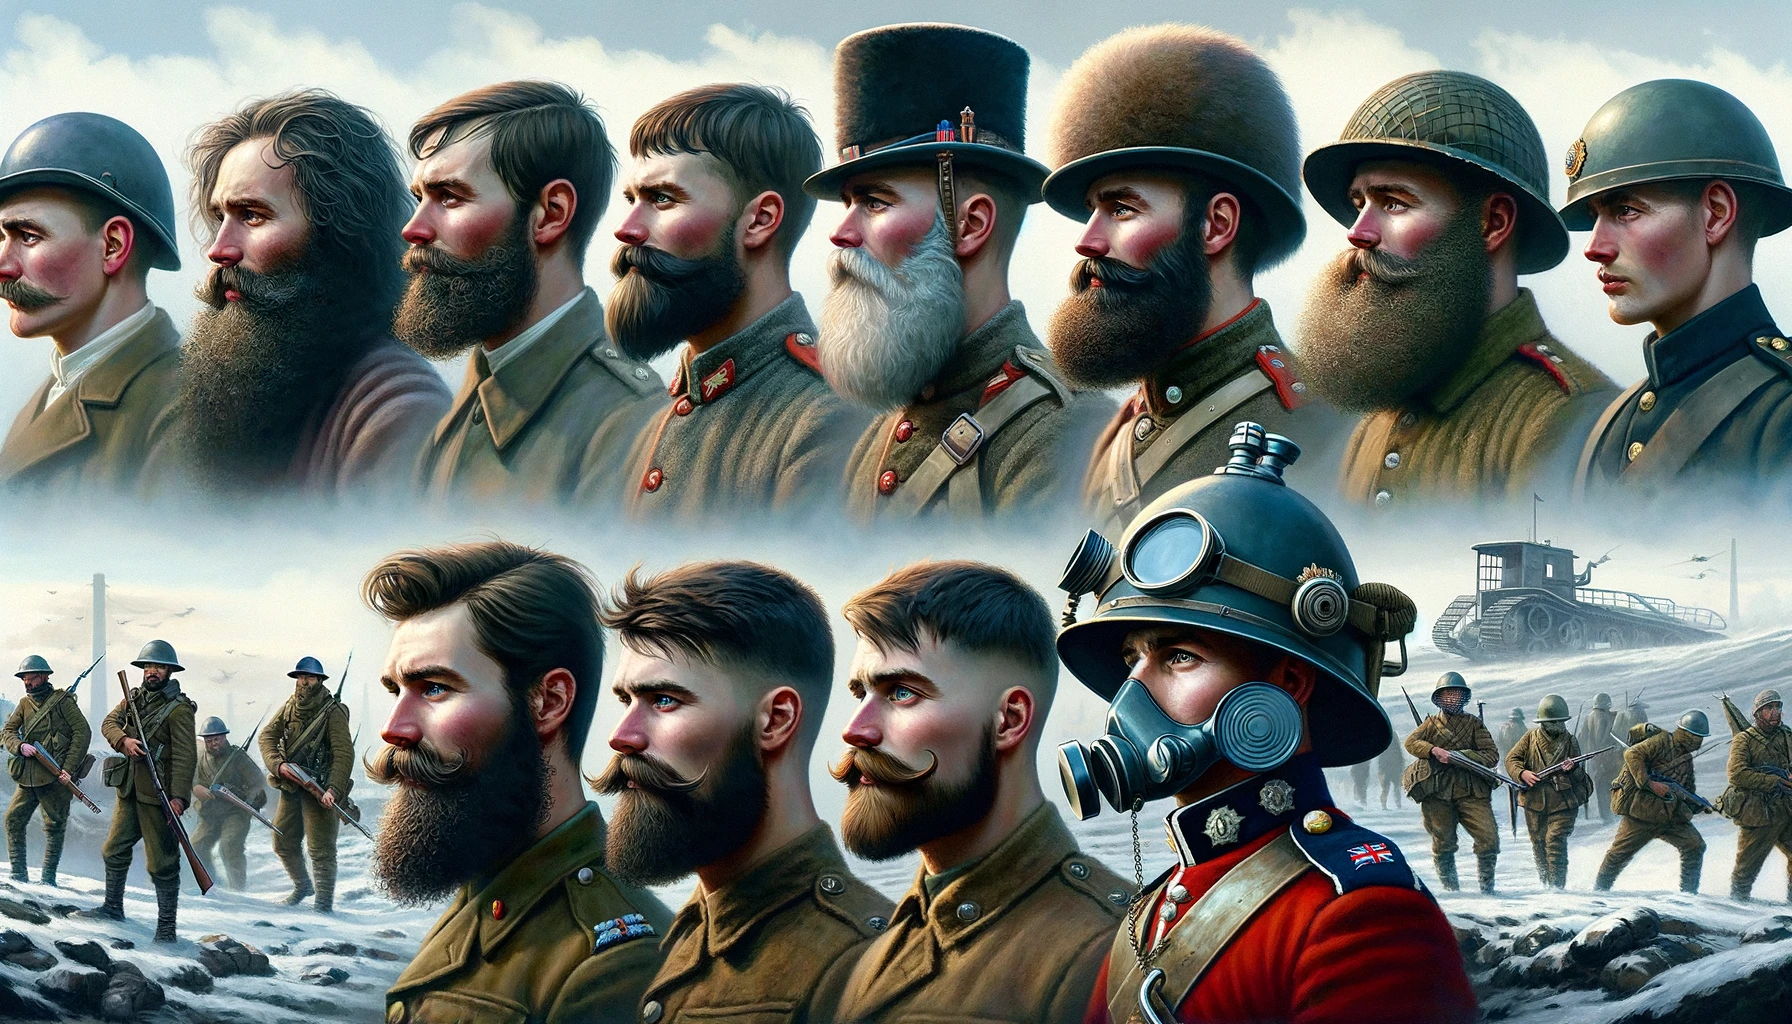 the evolution of British Army soldiers' facial hair from the 17th century to the modern day, featuring varying beard and moustache styles across historical battlefields.